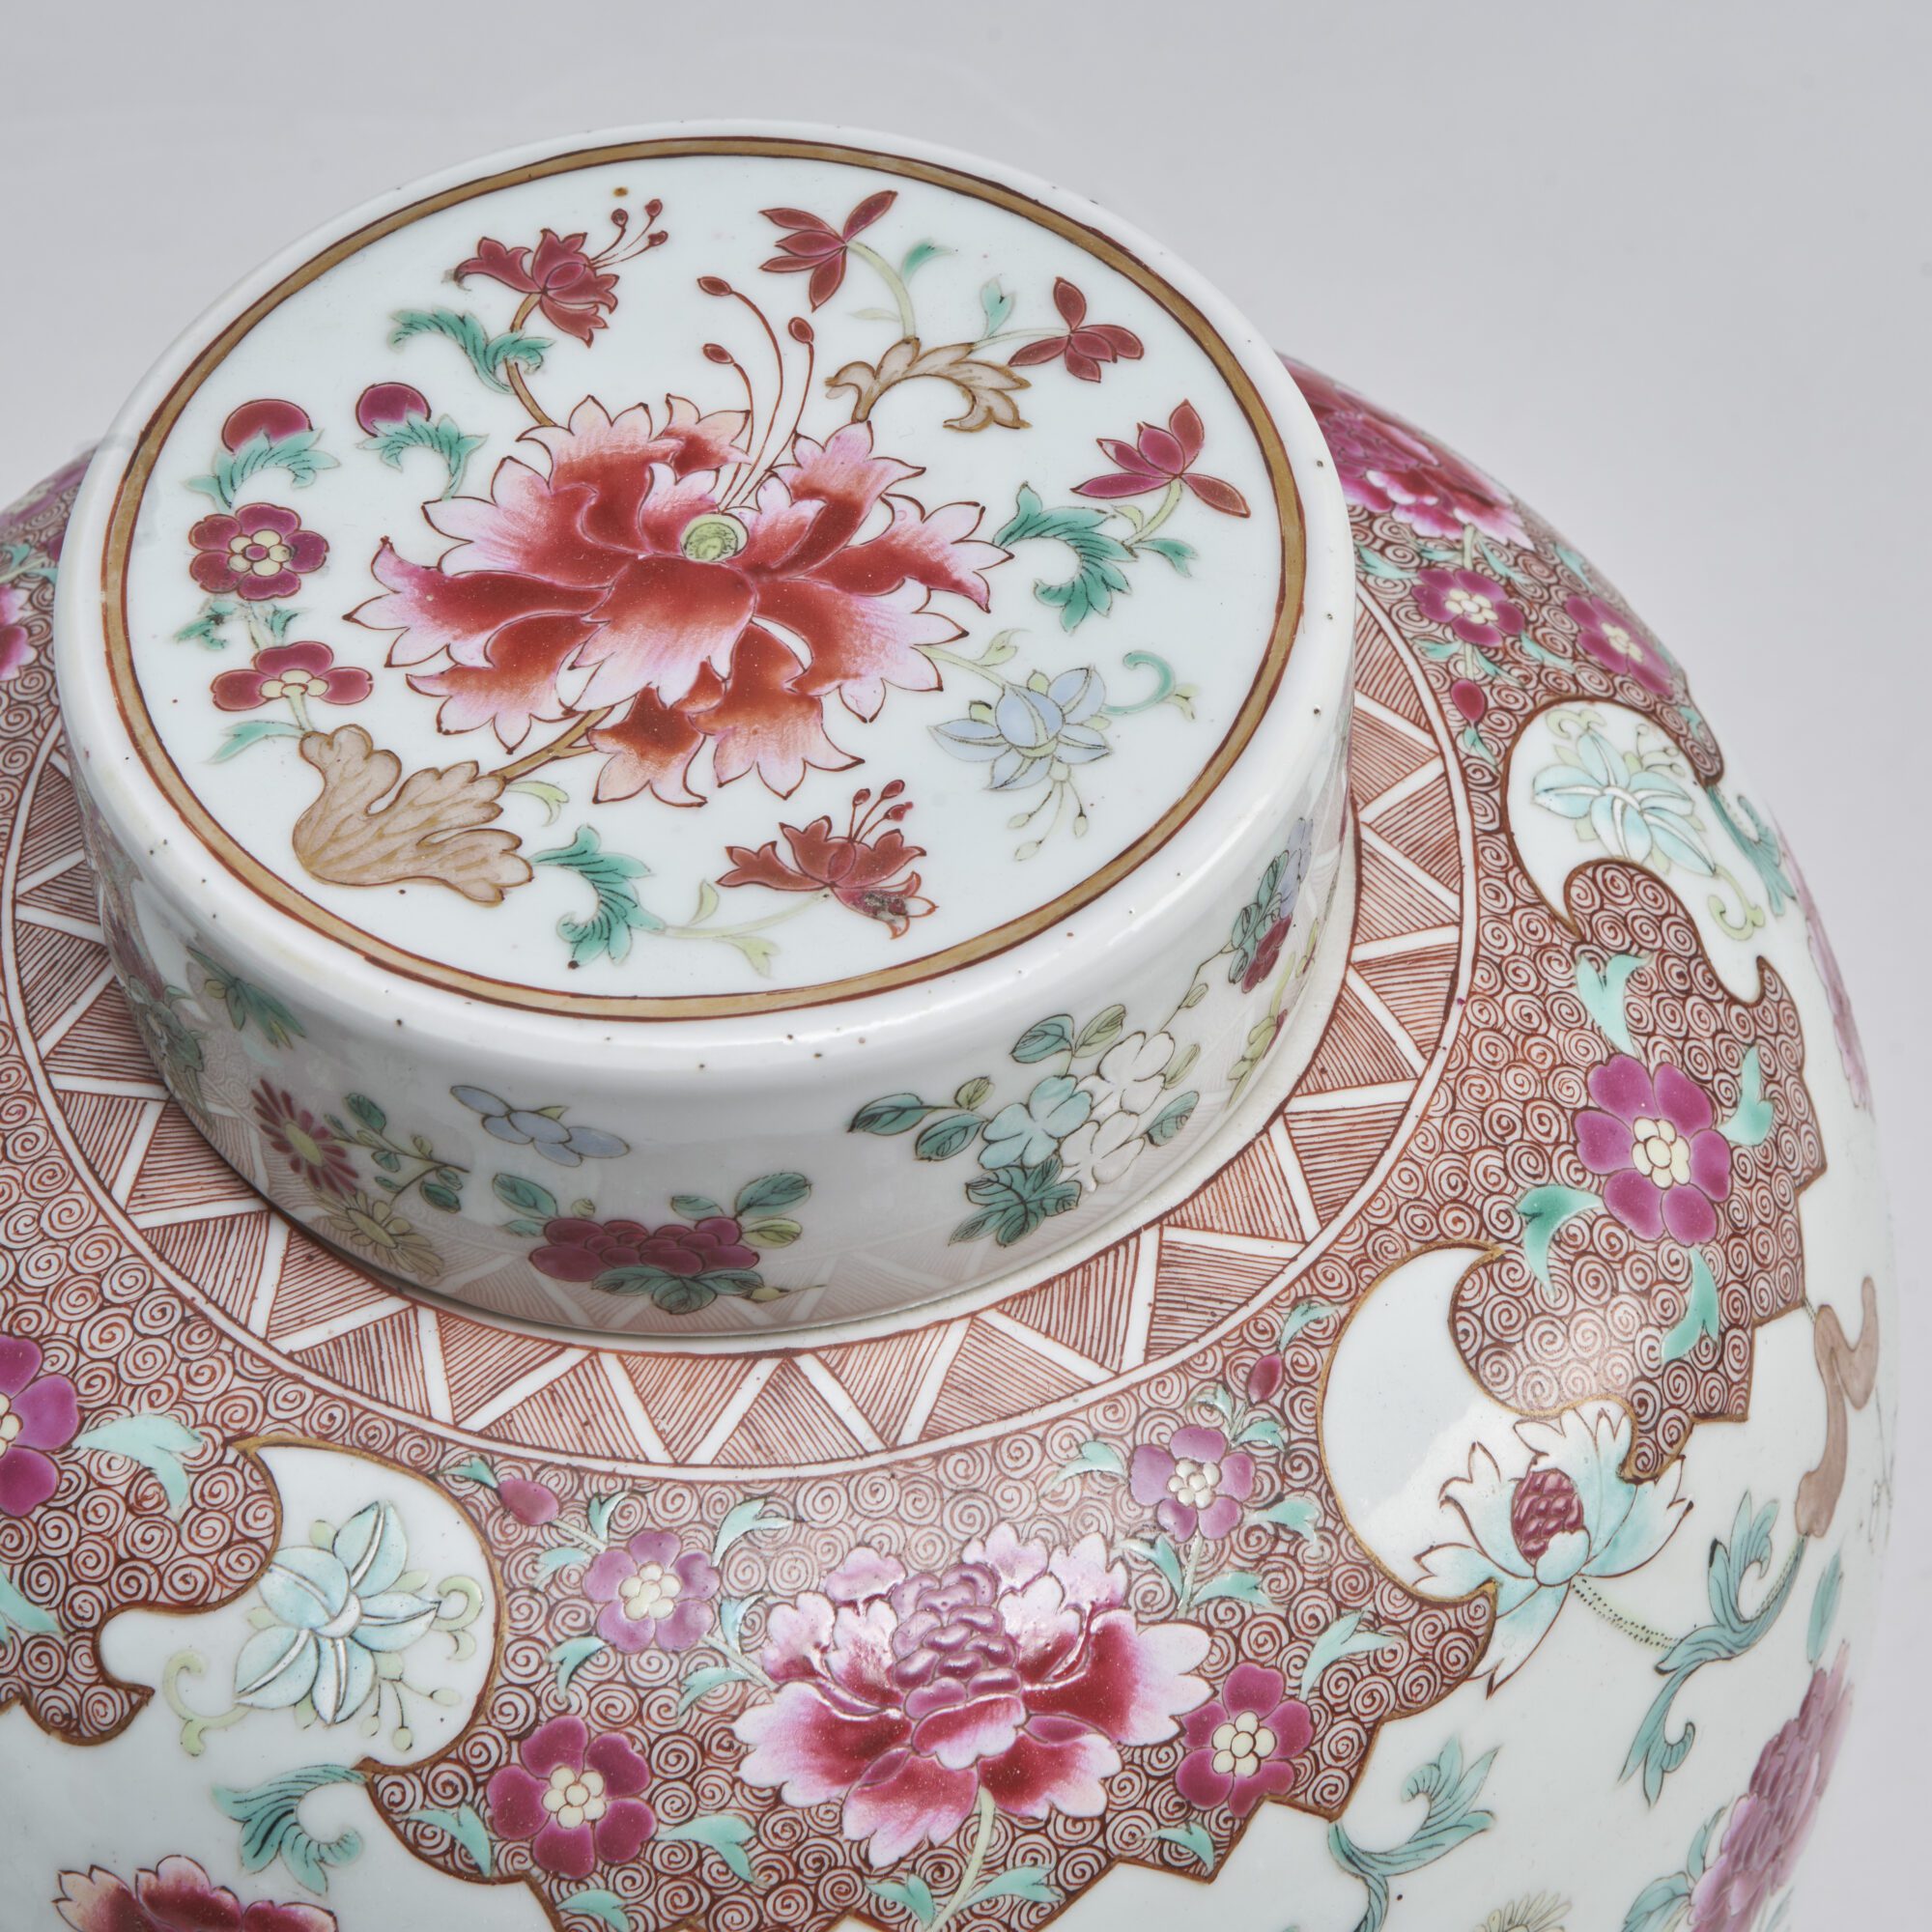 An ornate pair of 19th Century Chinese famille rose jars and covers from Kevin Page